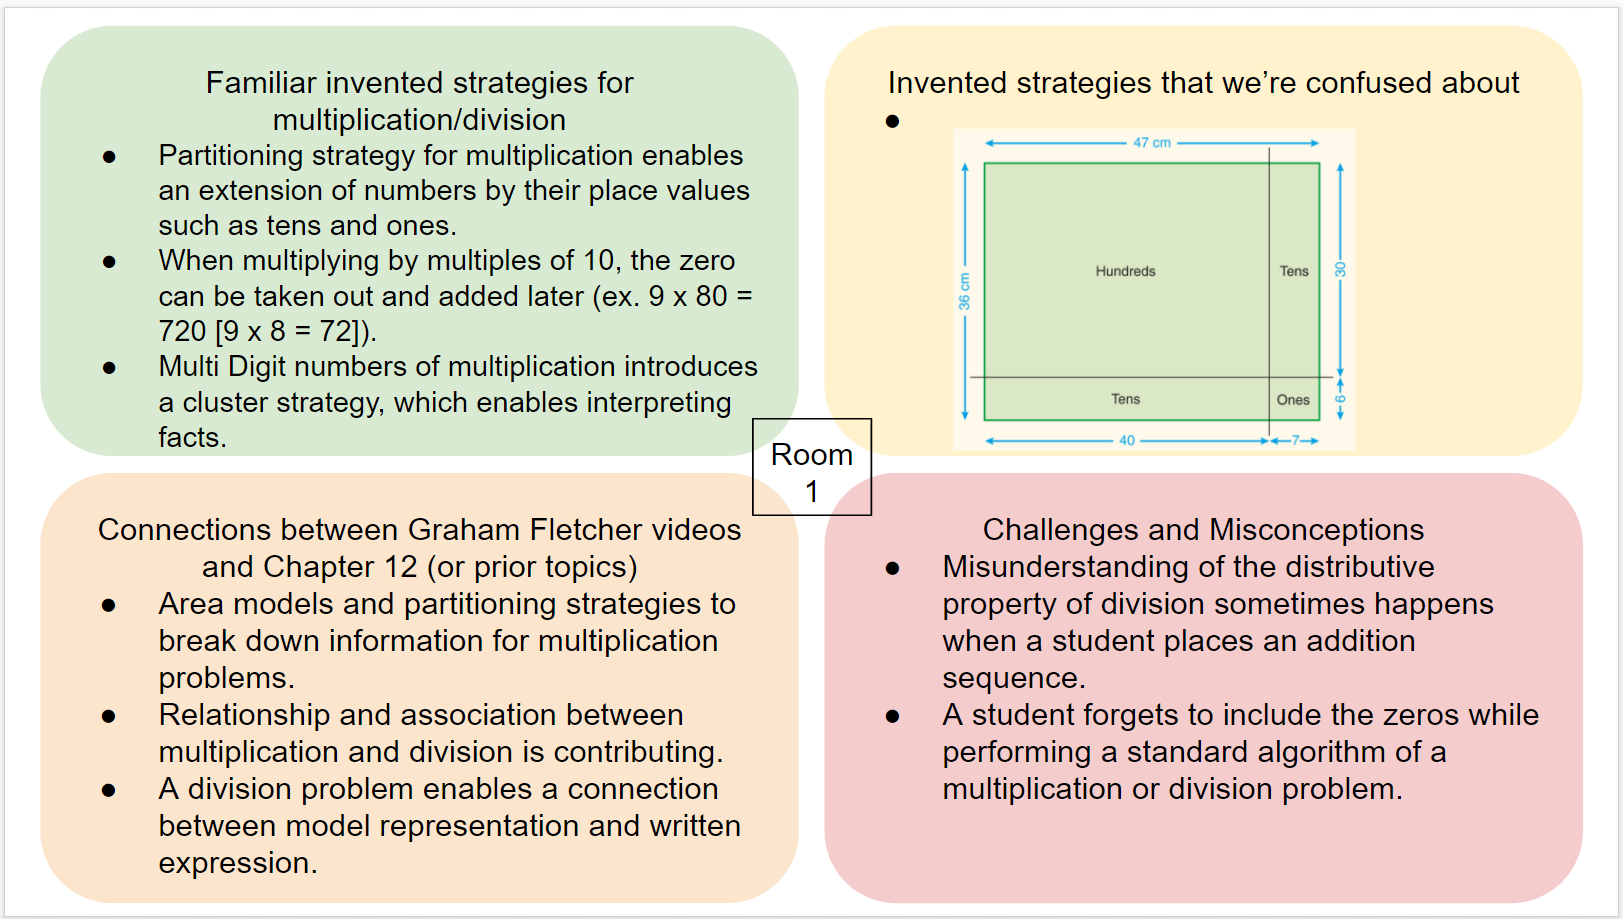 Example of breakout room slide with topics of confusion. Quadrants surround a central square labeled "Room 1". Each quadrant is a different color and features headers and bullets responding to questions asked earlier in the slide.